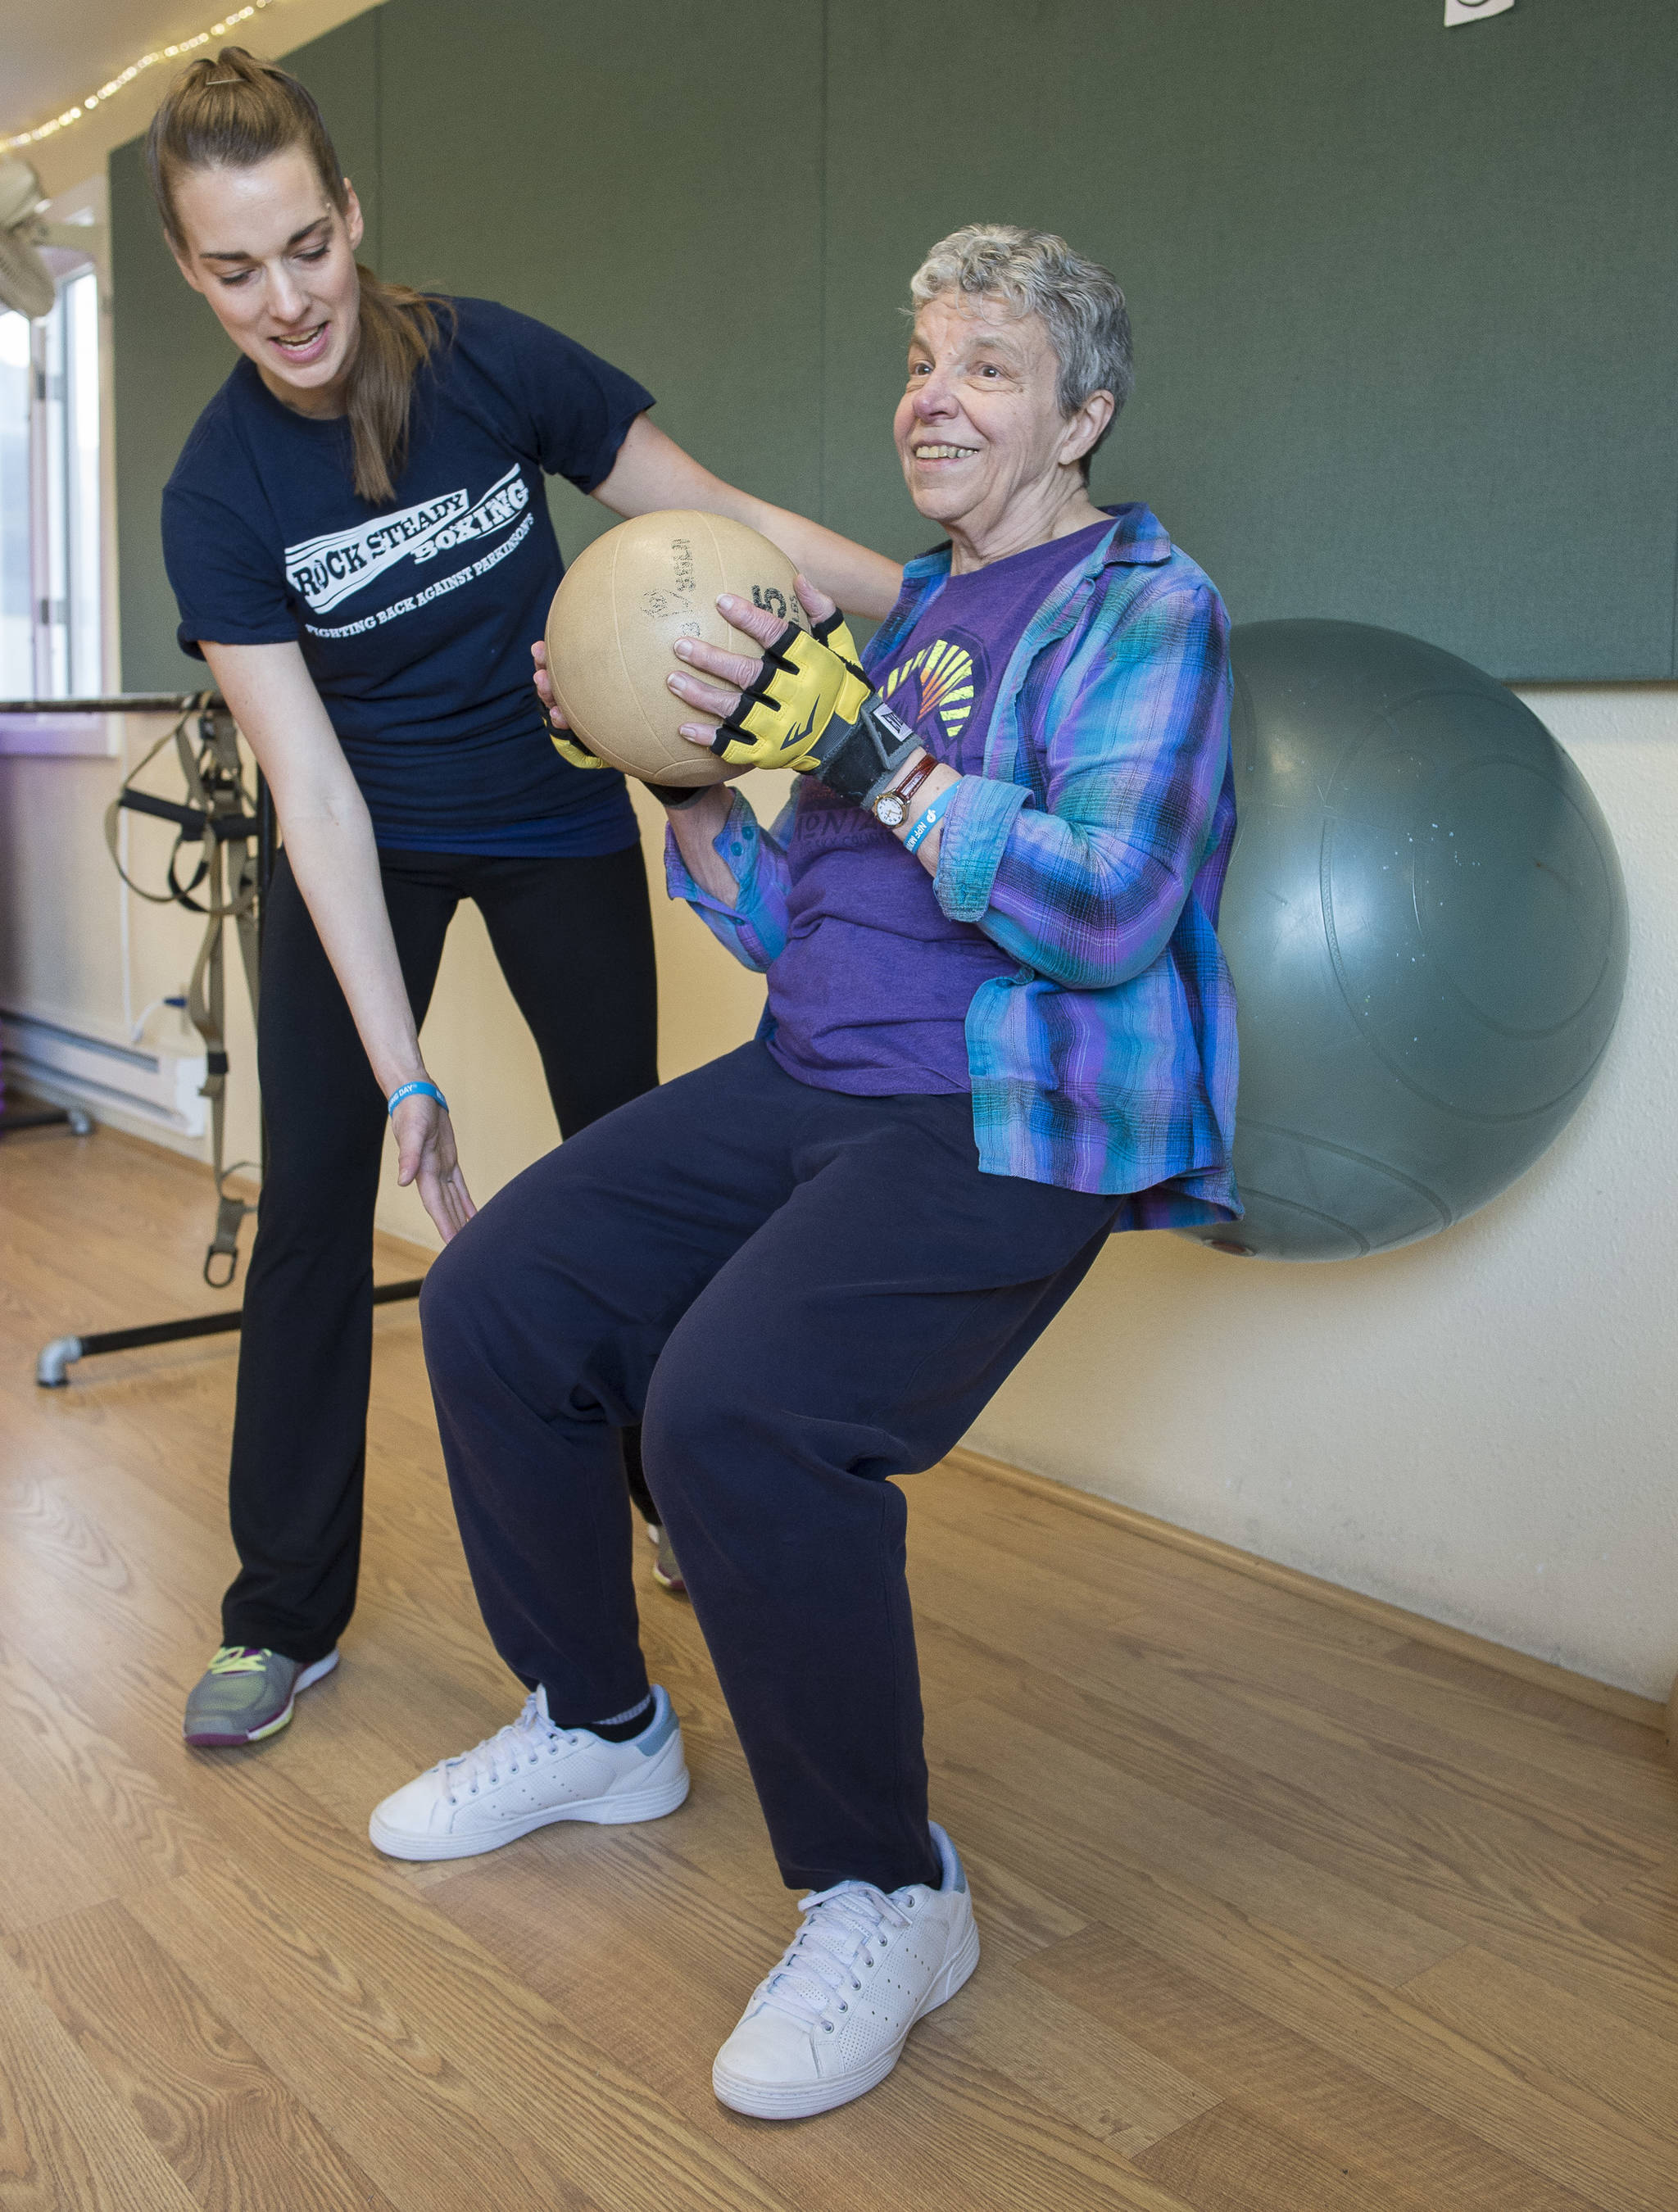 Daisy Davenport, right, works out with the help of coach Keegan Caroll during the Rock Steady workout program to fight against Parkinson’s Disease at Pavitt Health & Fitness on Thursday. Michael Penn | Juneau Empire